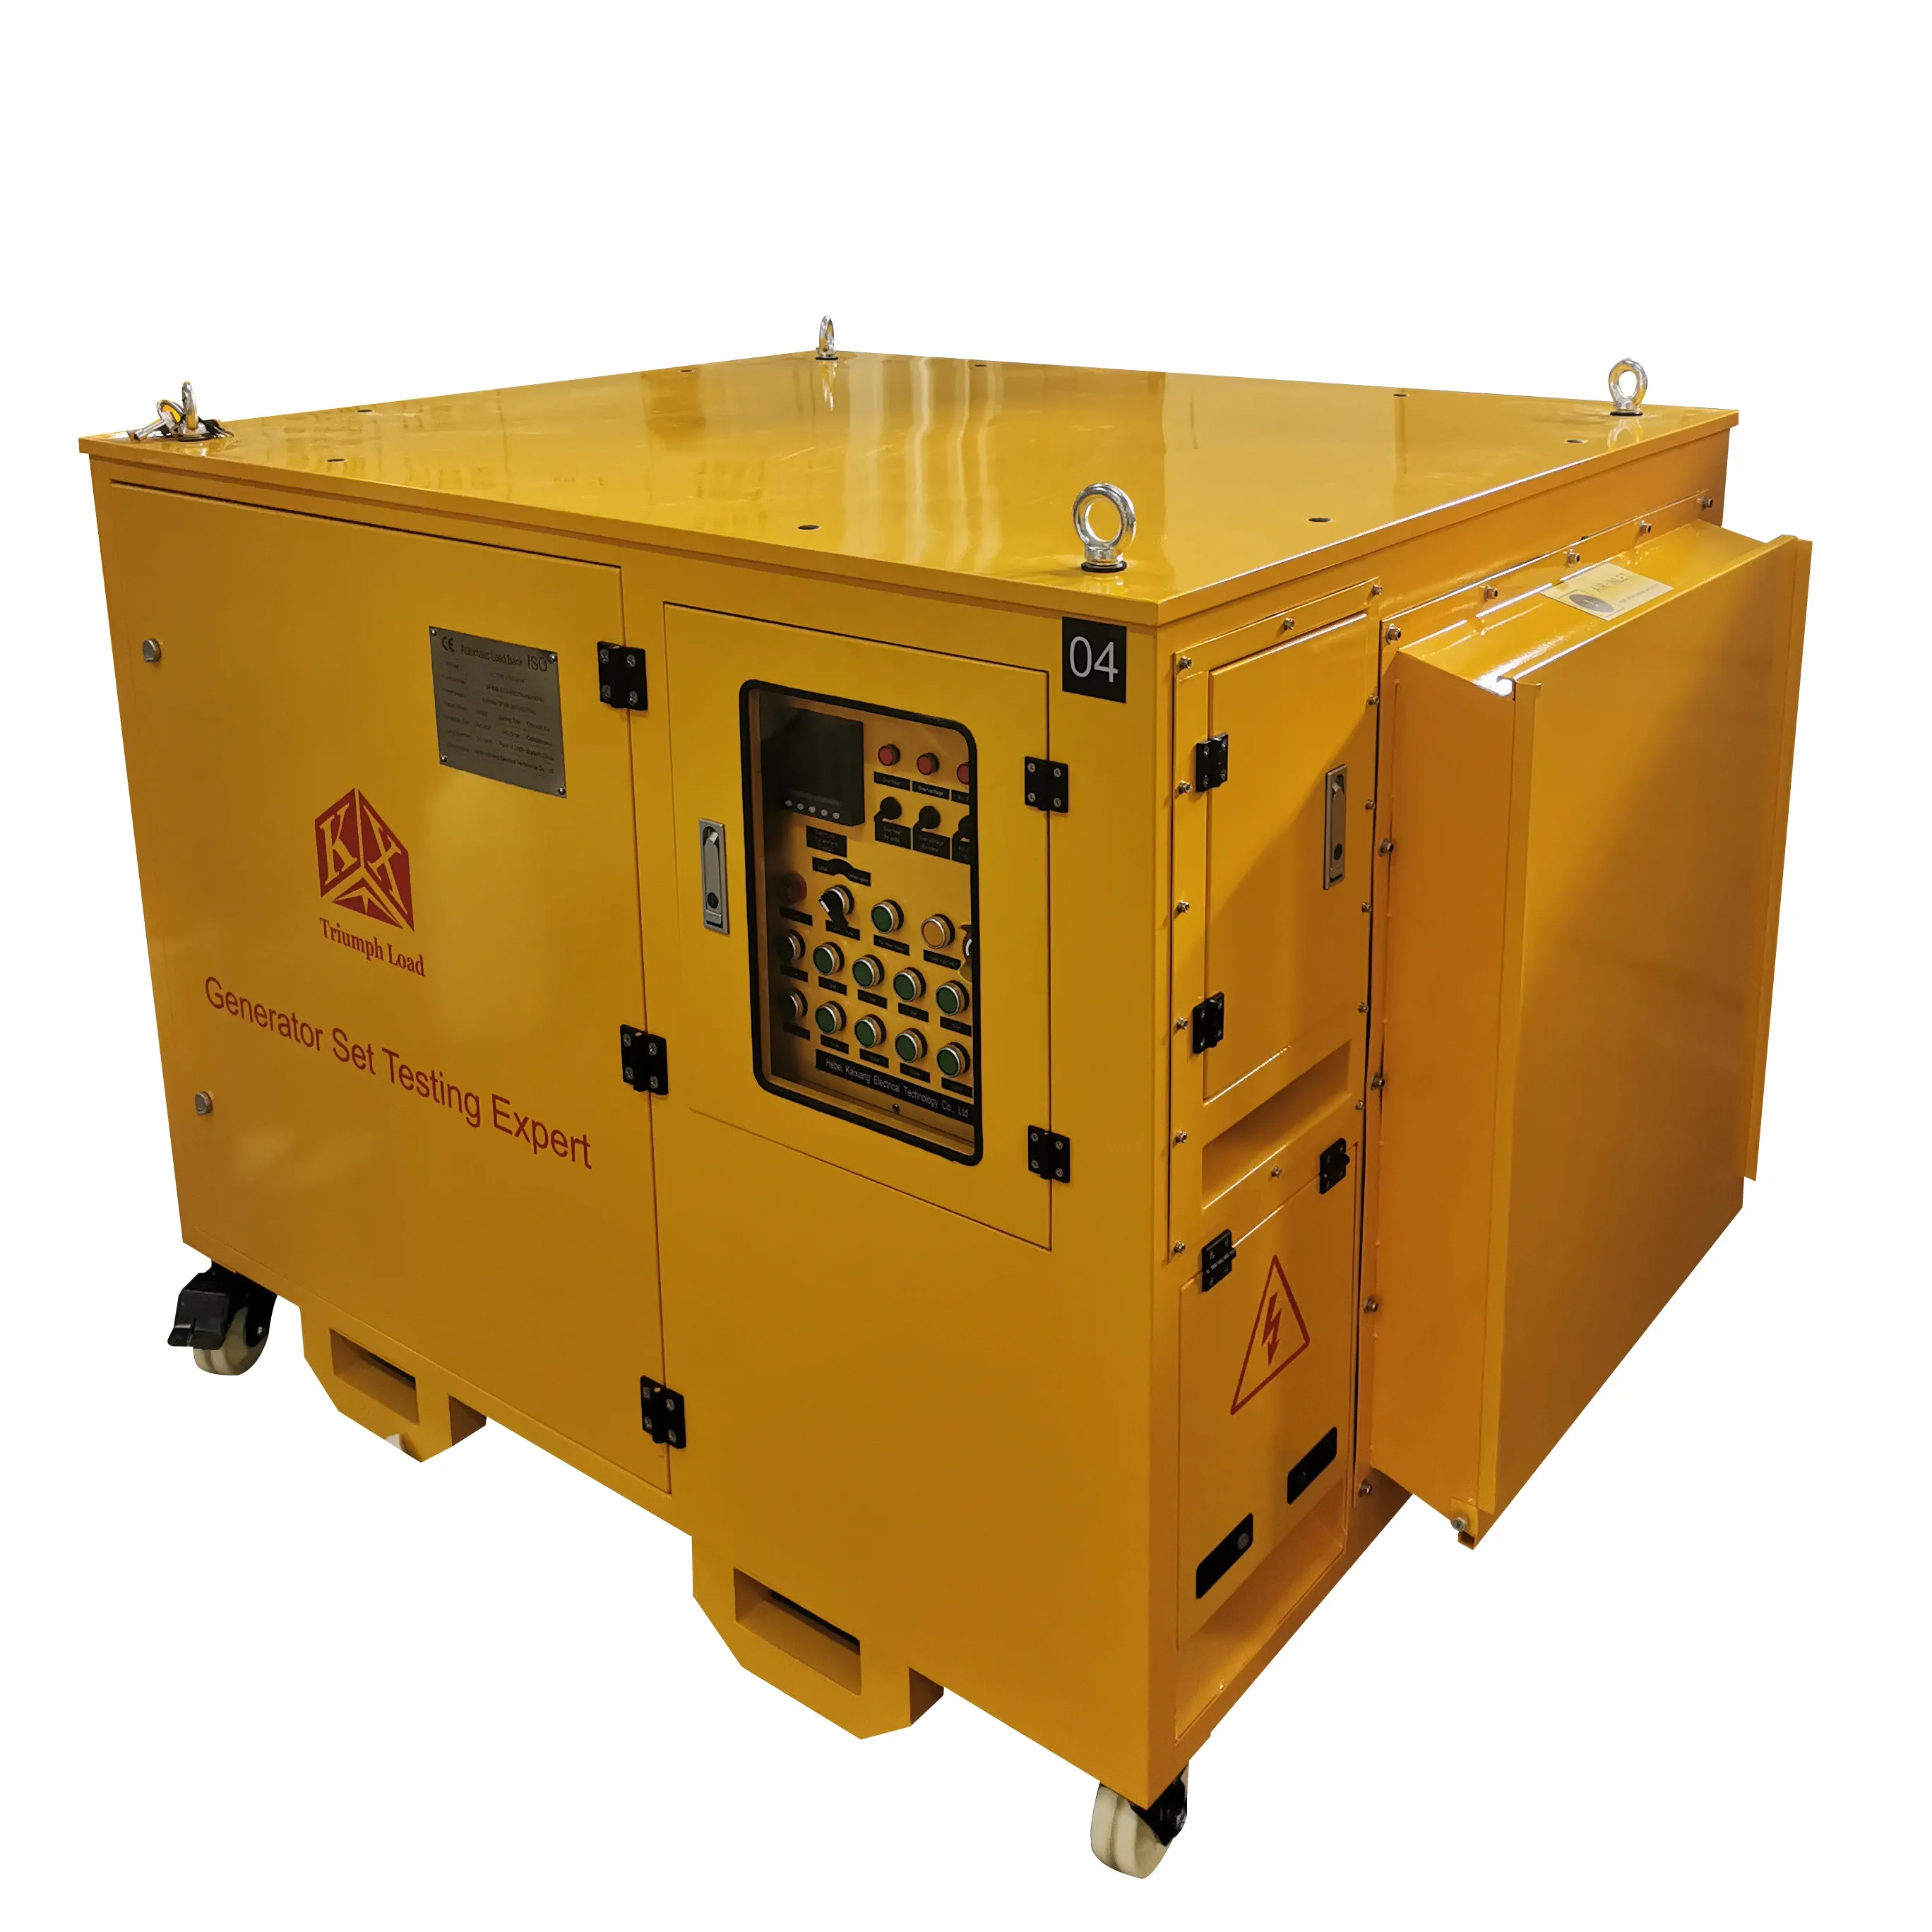 High Quality AC 500kW Resistive Variable Load Bank For Generator Set Testing